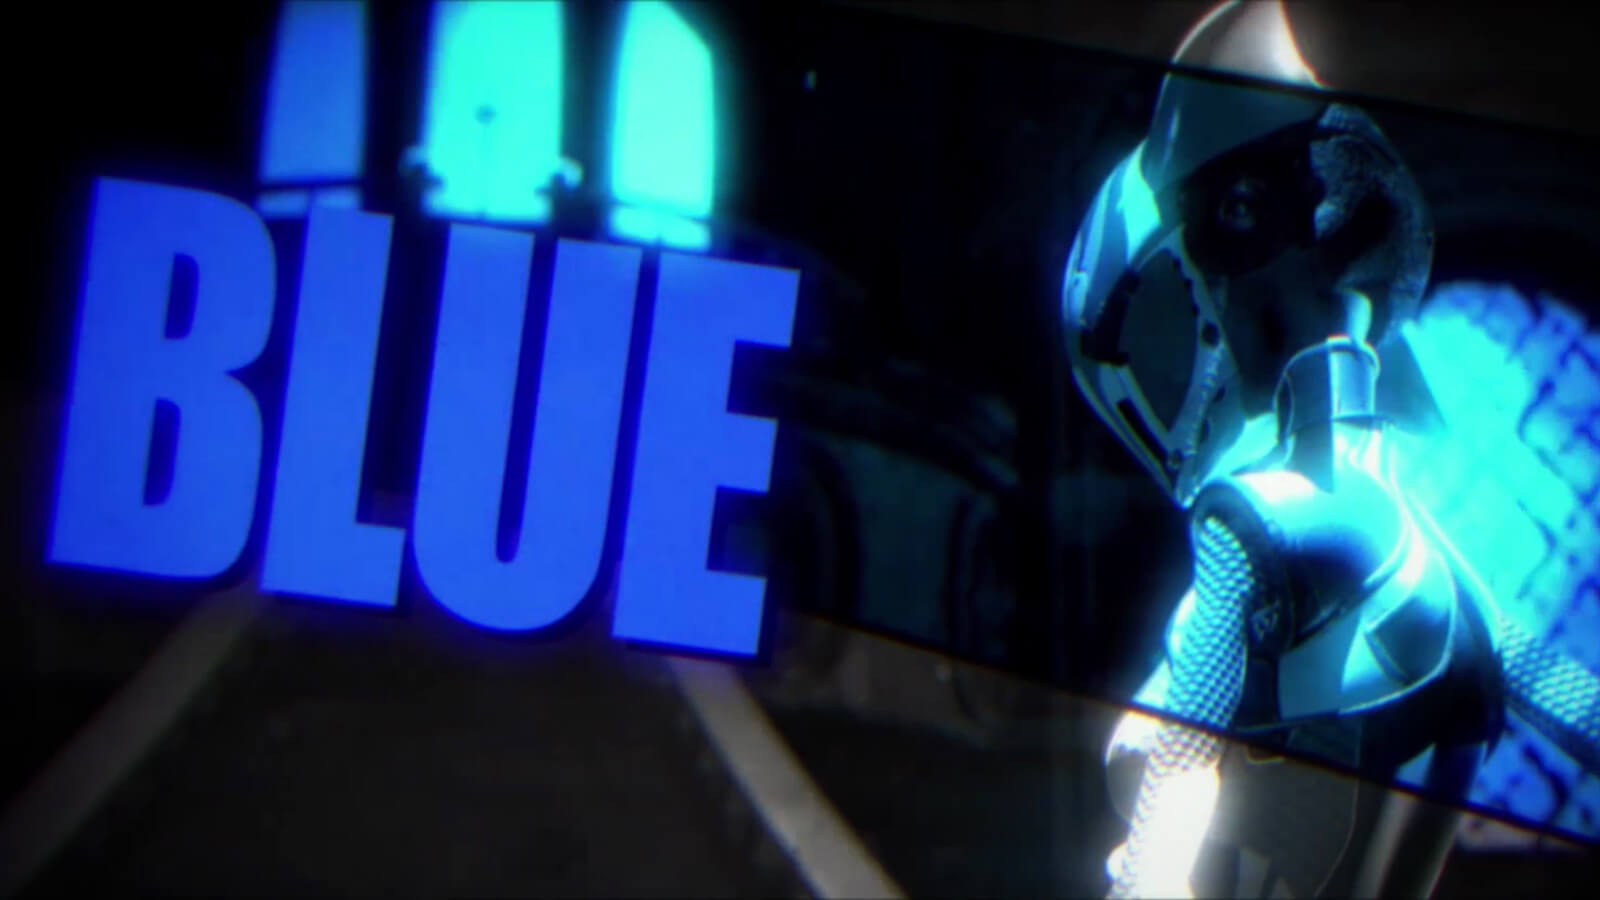 Thin figure in a lithe futuristic suit and helmet to the right of the word BLUE in large blue letters